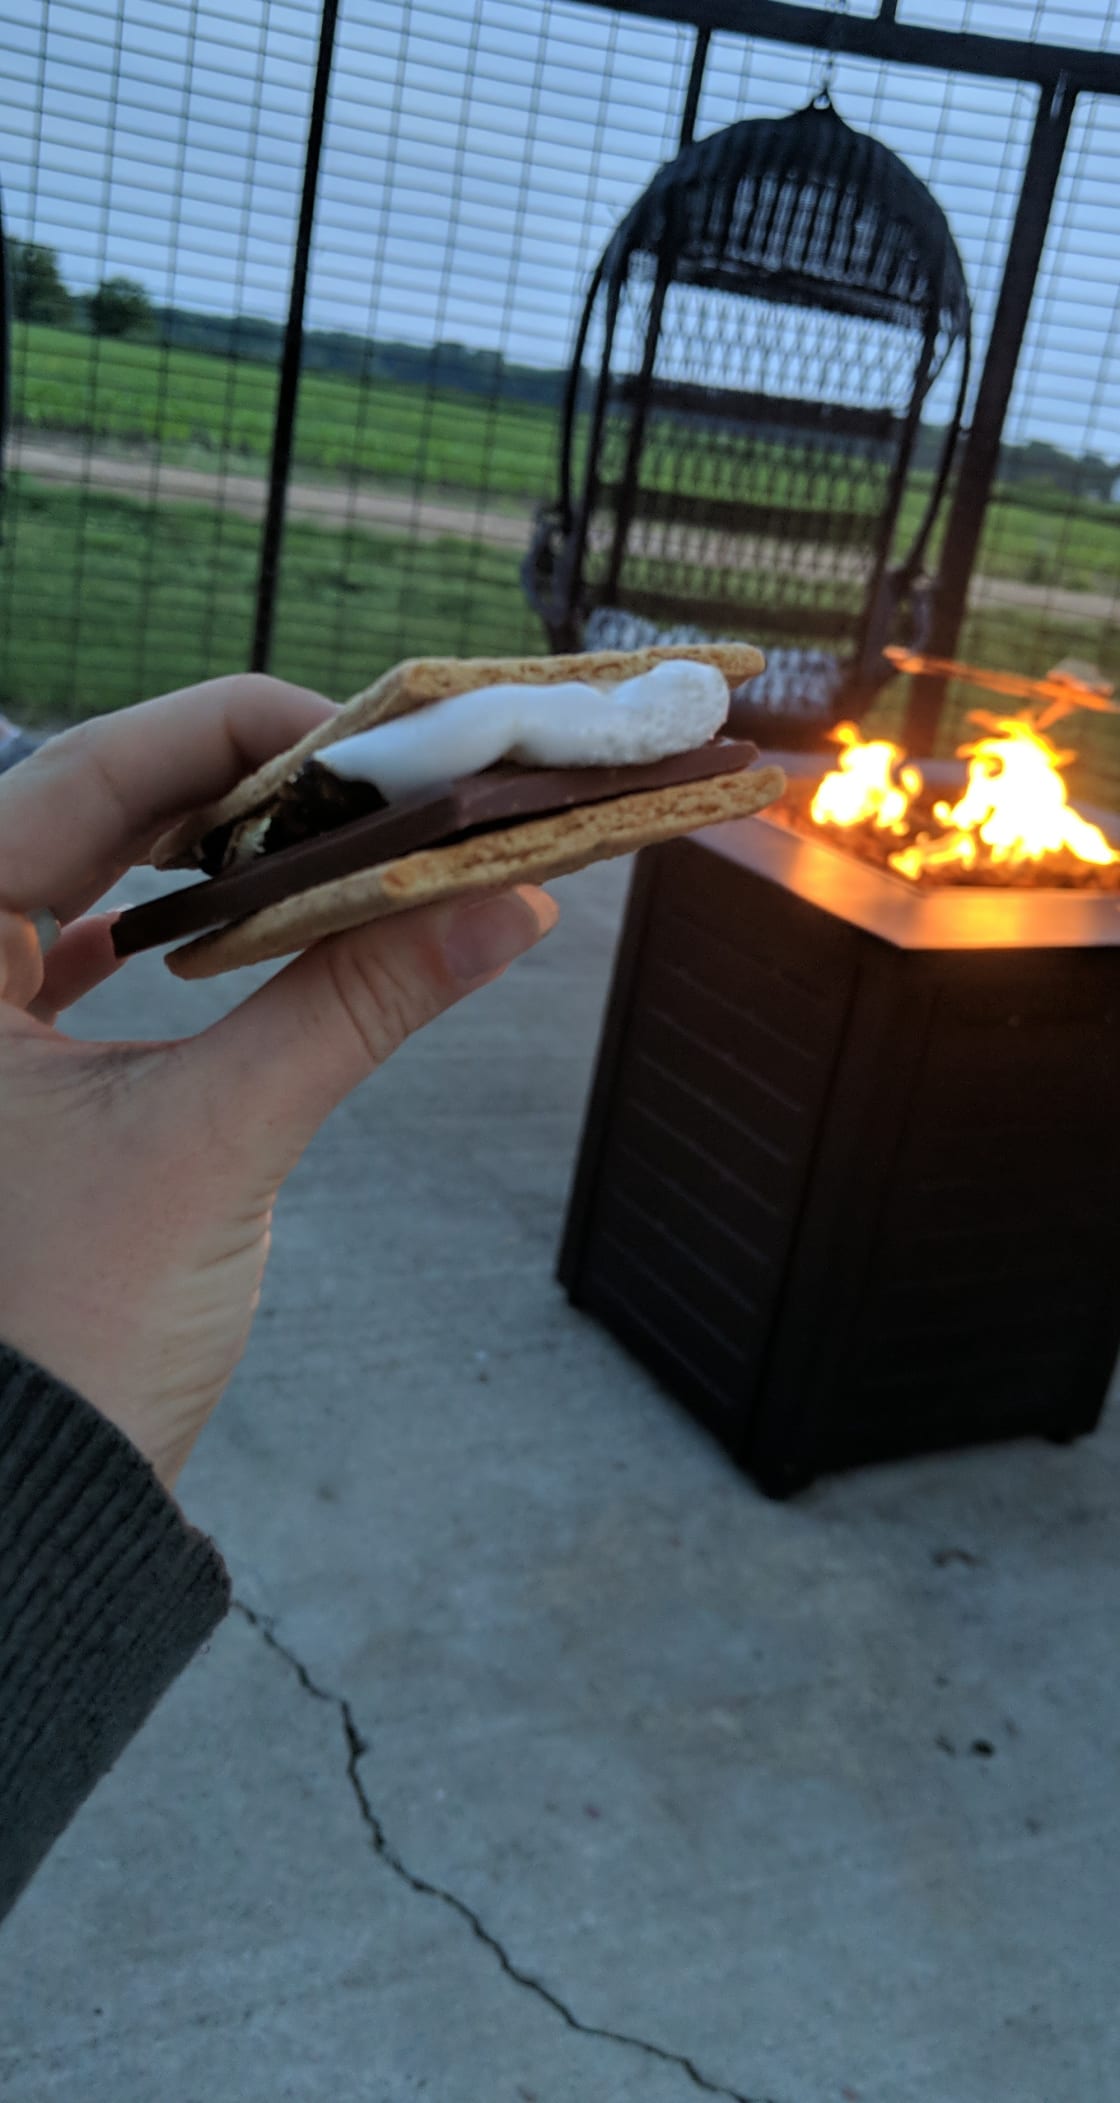 Smores in the corn crib swings